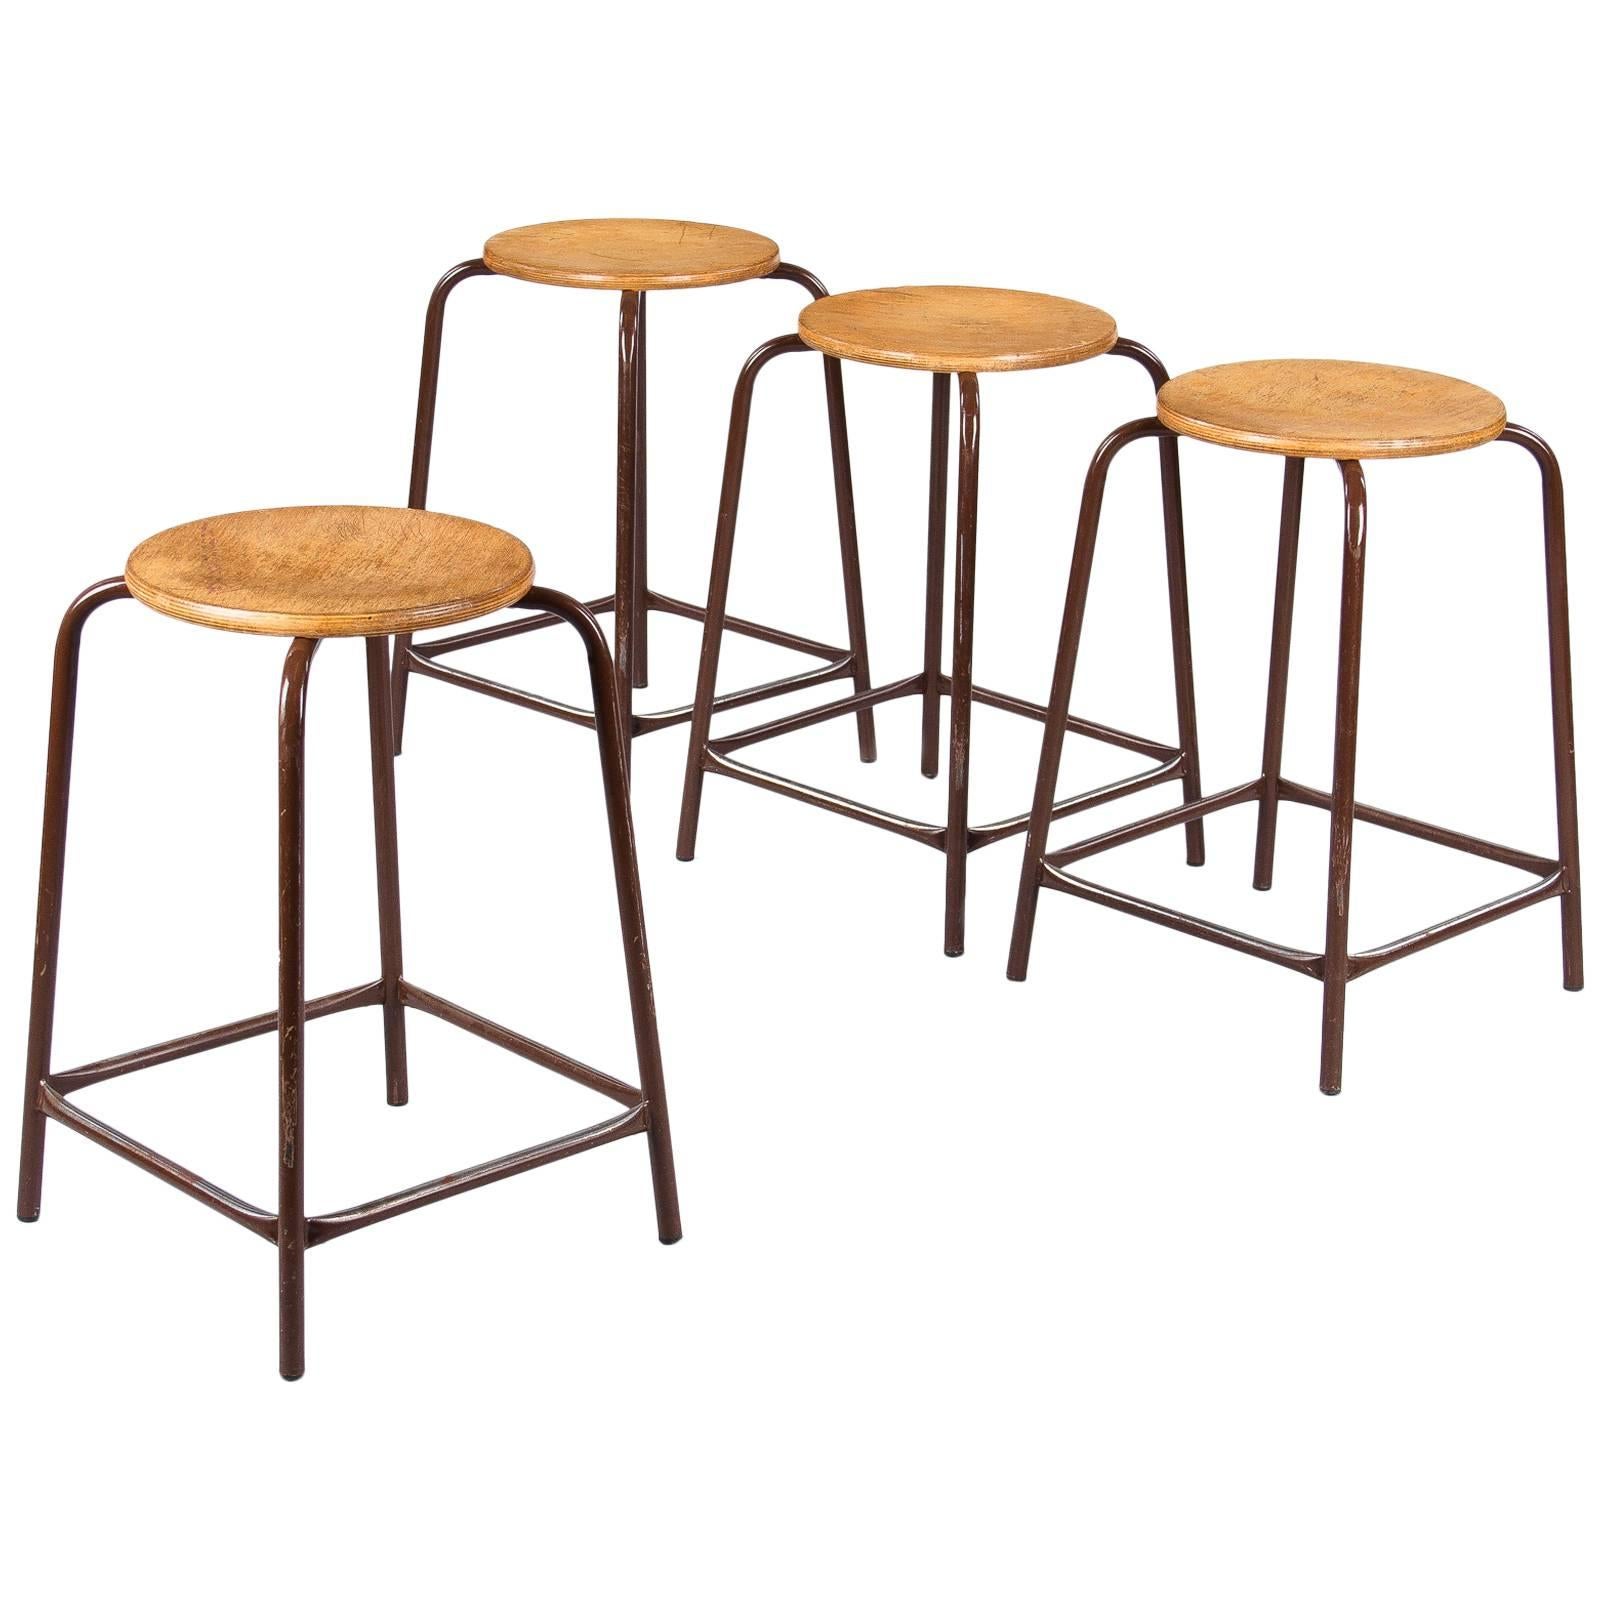 Set of Four French Vintage Wood and Metal Industrial Stools, 1950s